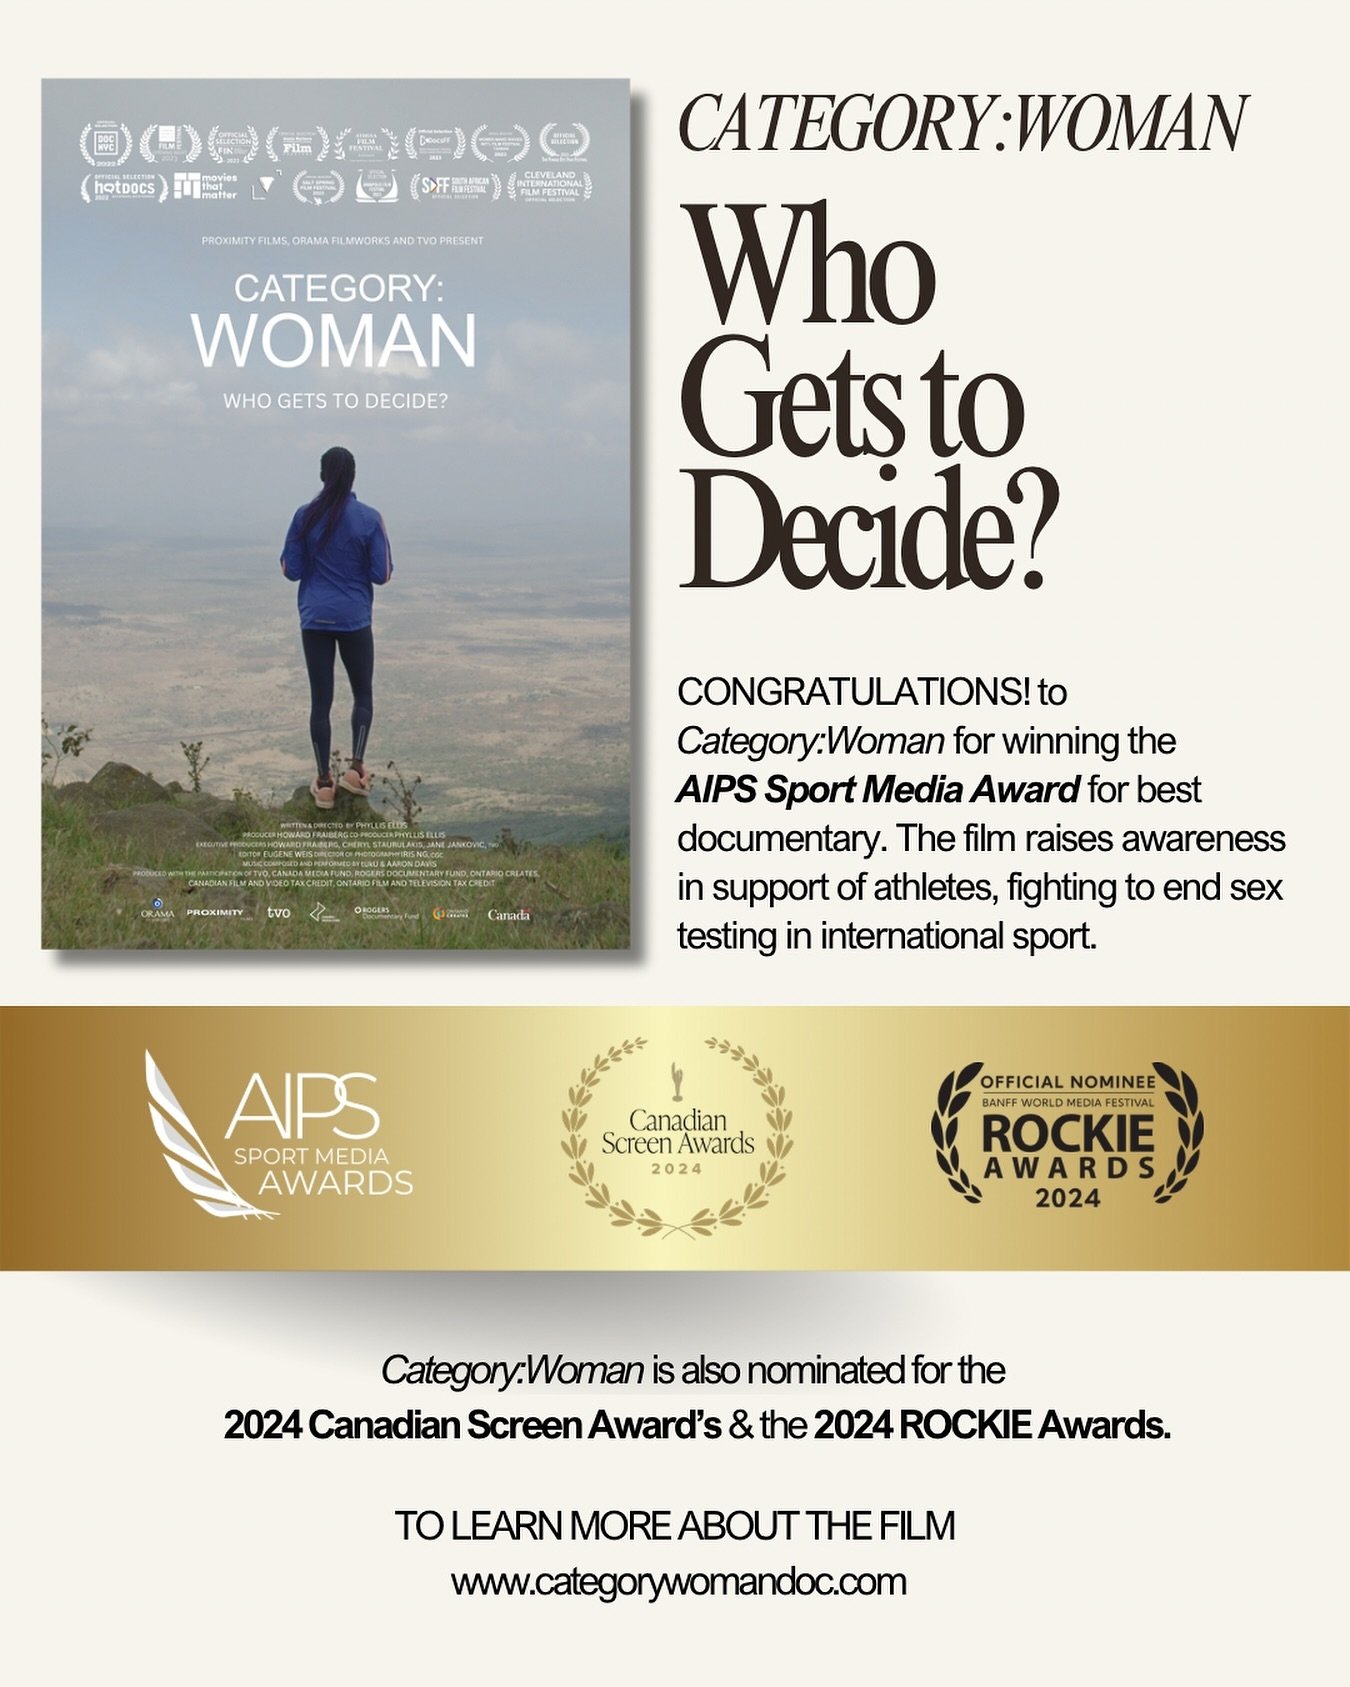 ⭐️ Congratulations to Category:Woman for winning the AIPS Sport Media Award for Best Documentary. The film raises awareness in support of athletes, who continue to fight for their right to compete on the world stage. The film is also nominated for th